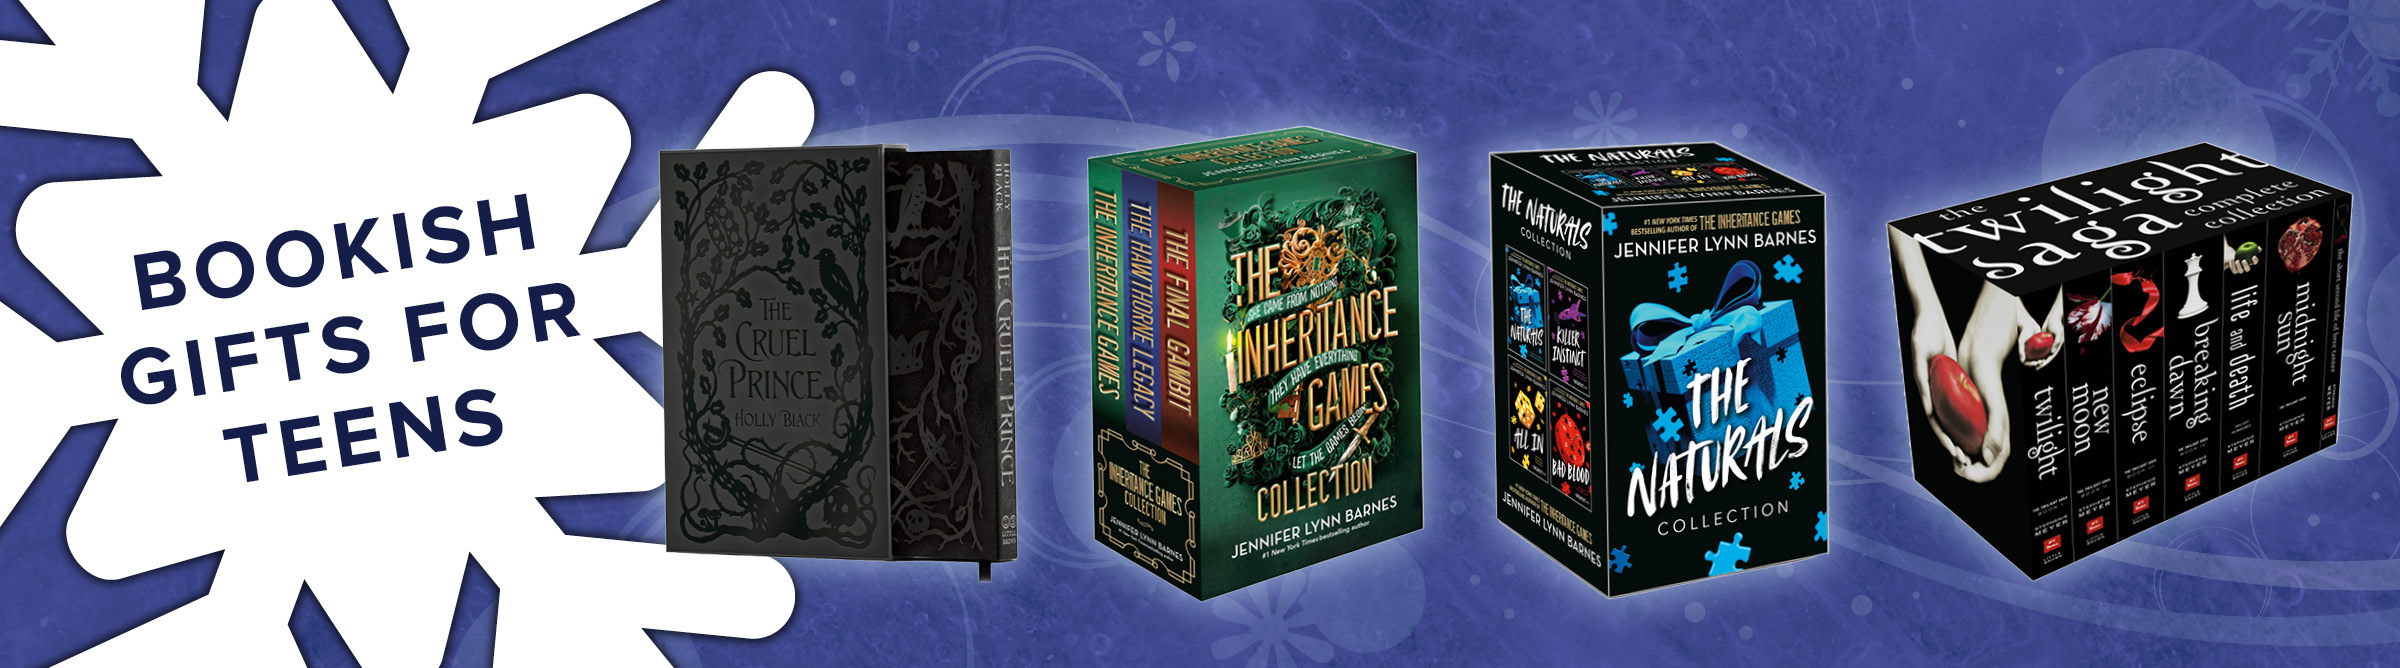 Banner that says "Bookish Gifts For Teens" promoting box sets and special editions 